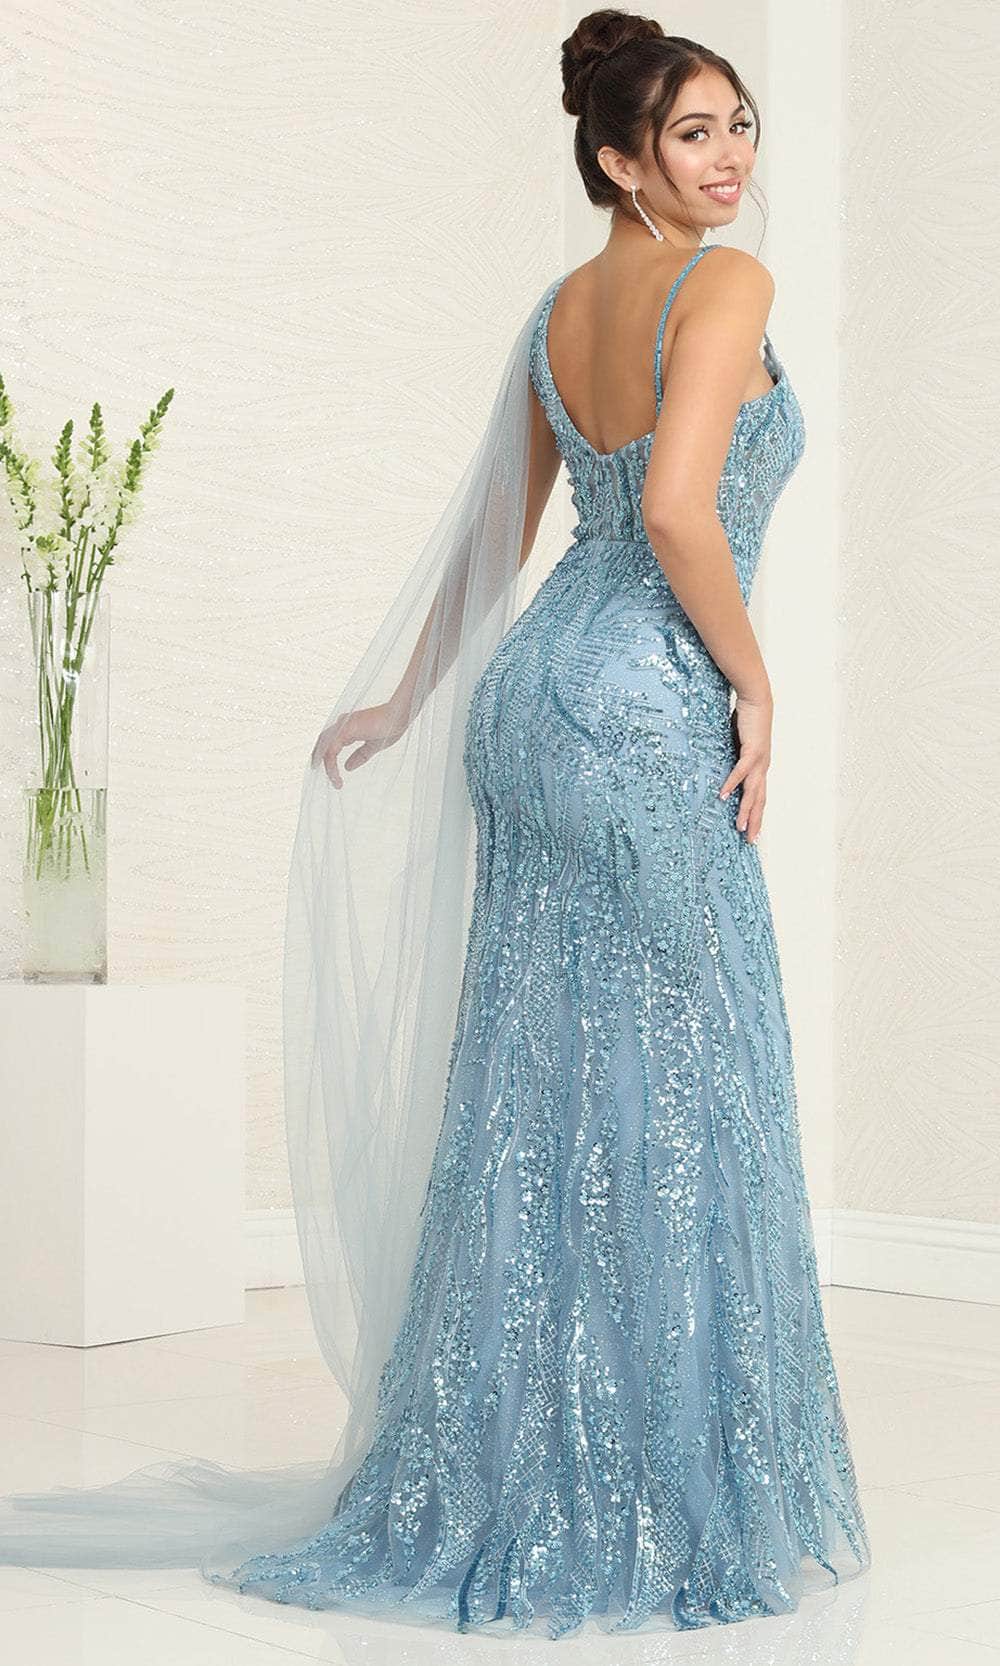 May Queen RQ8066 - Beaded Plunged V-Neck Prom Gown Prom Dresses